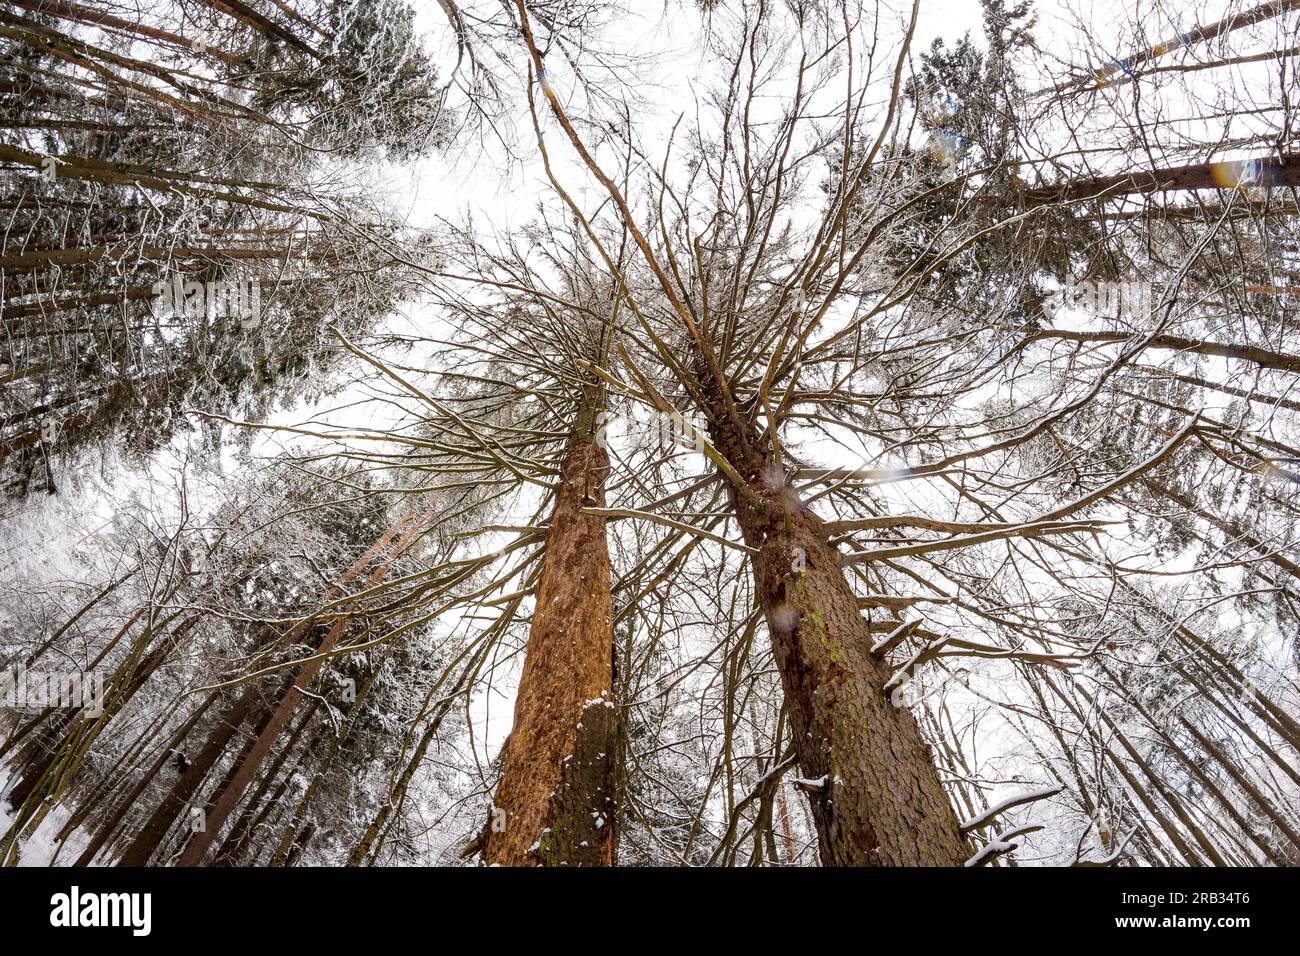 Old dried spruce with peeled bark in a winter forest, fish-eye effect Stock Photo